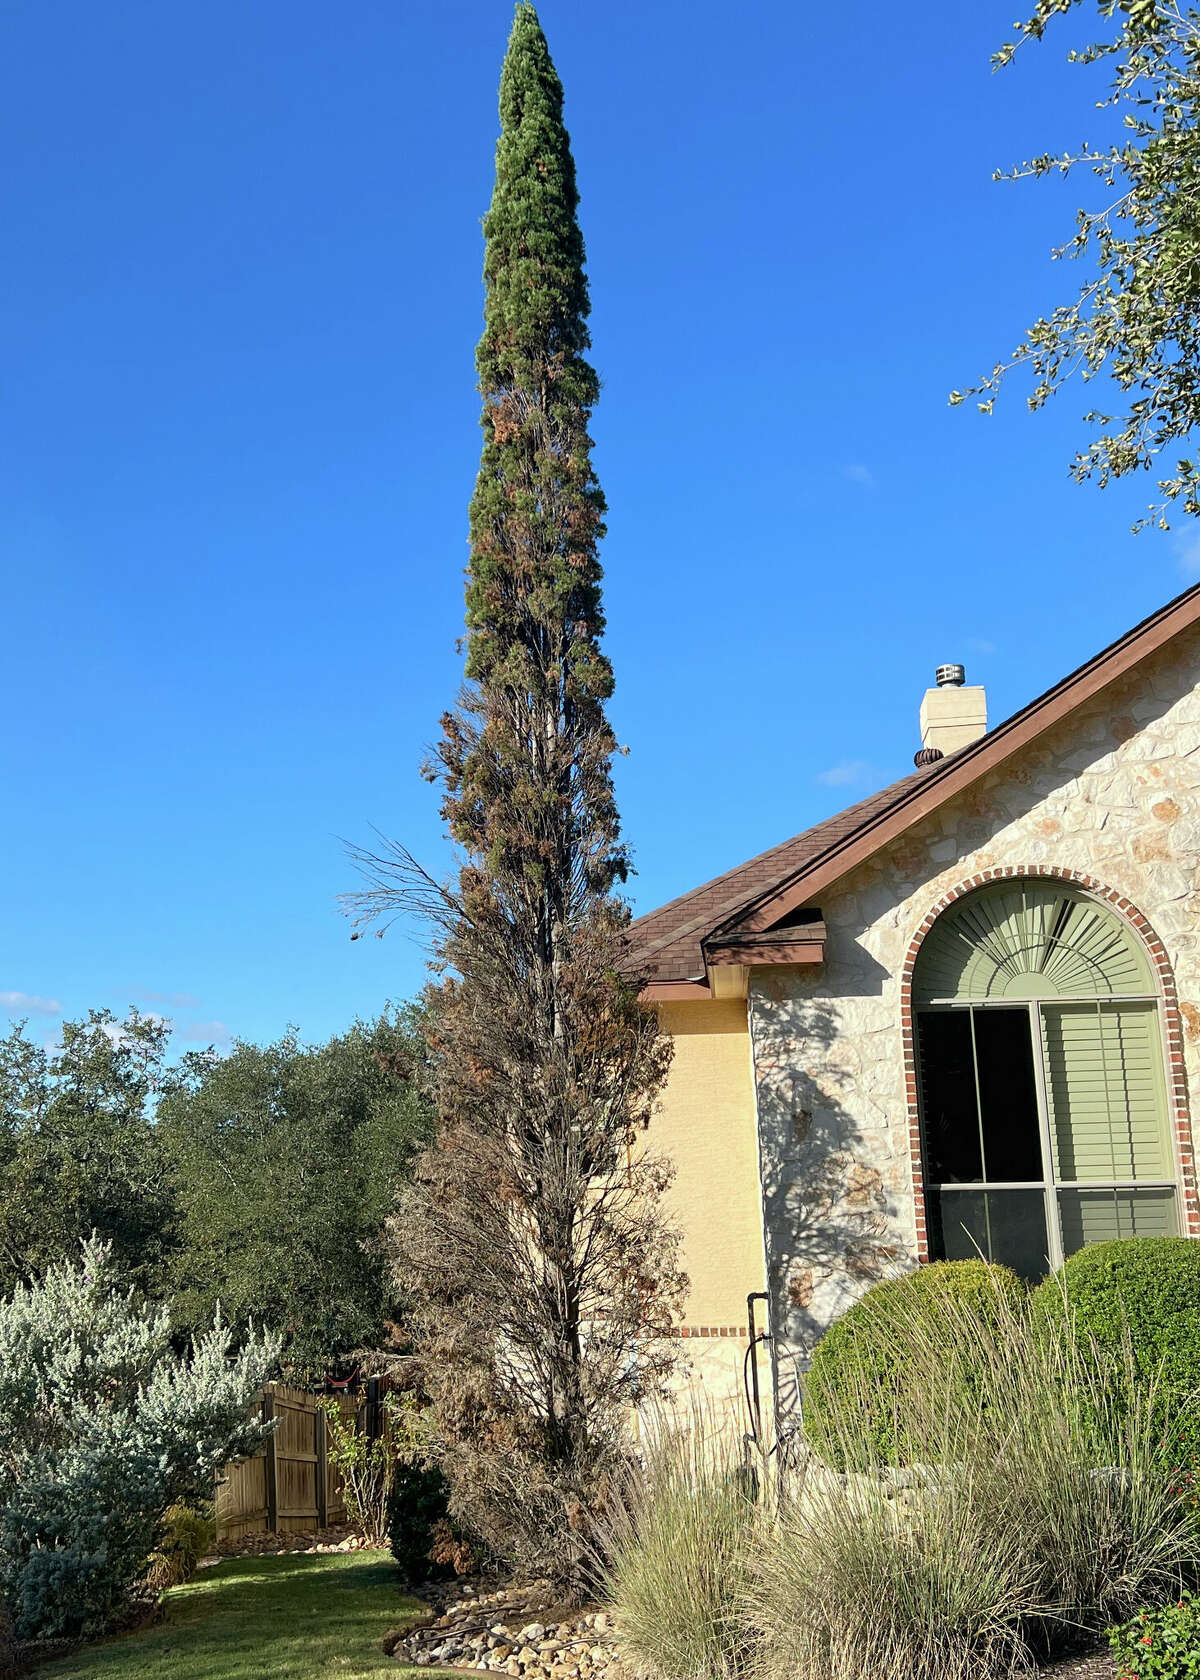 Italian cypress, a victim of the February 2021 freeze, could be replaced with Scarlet’s Peak yaupon holly.